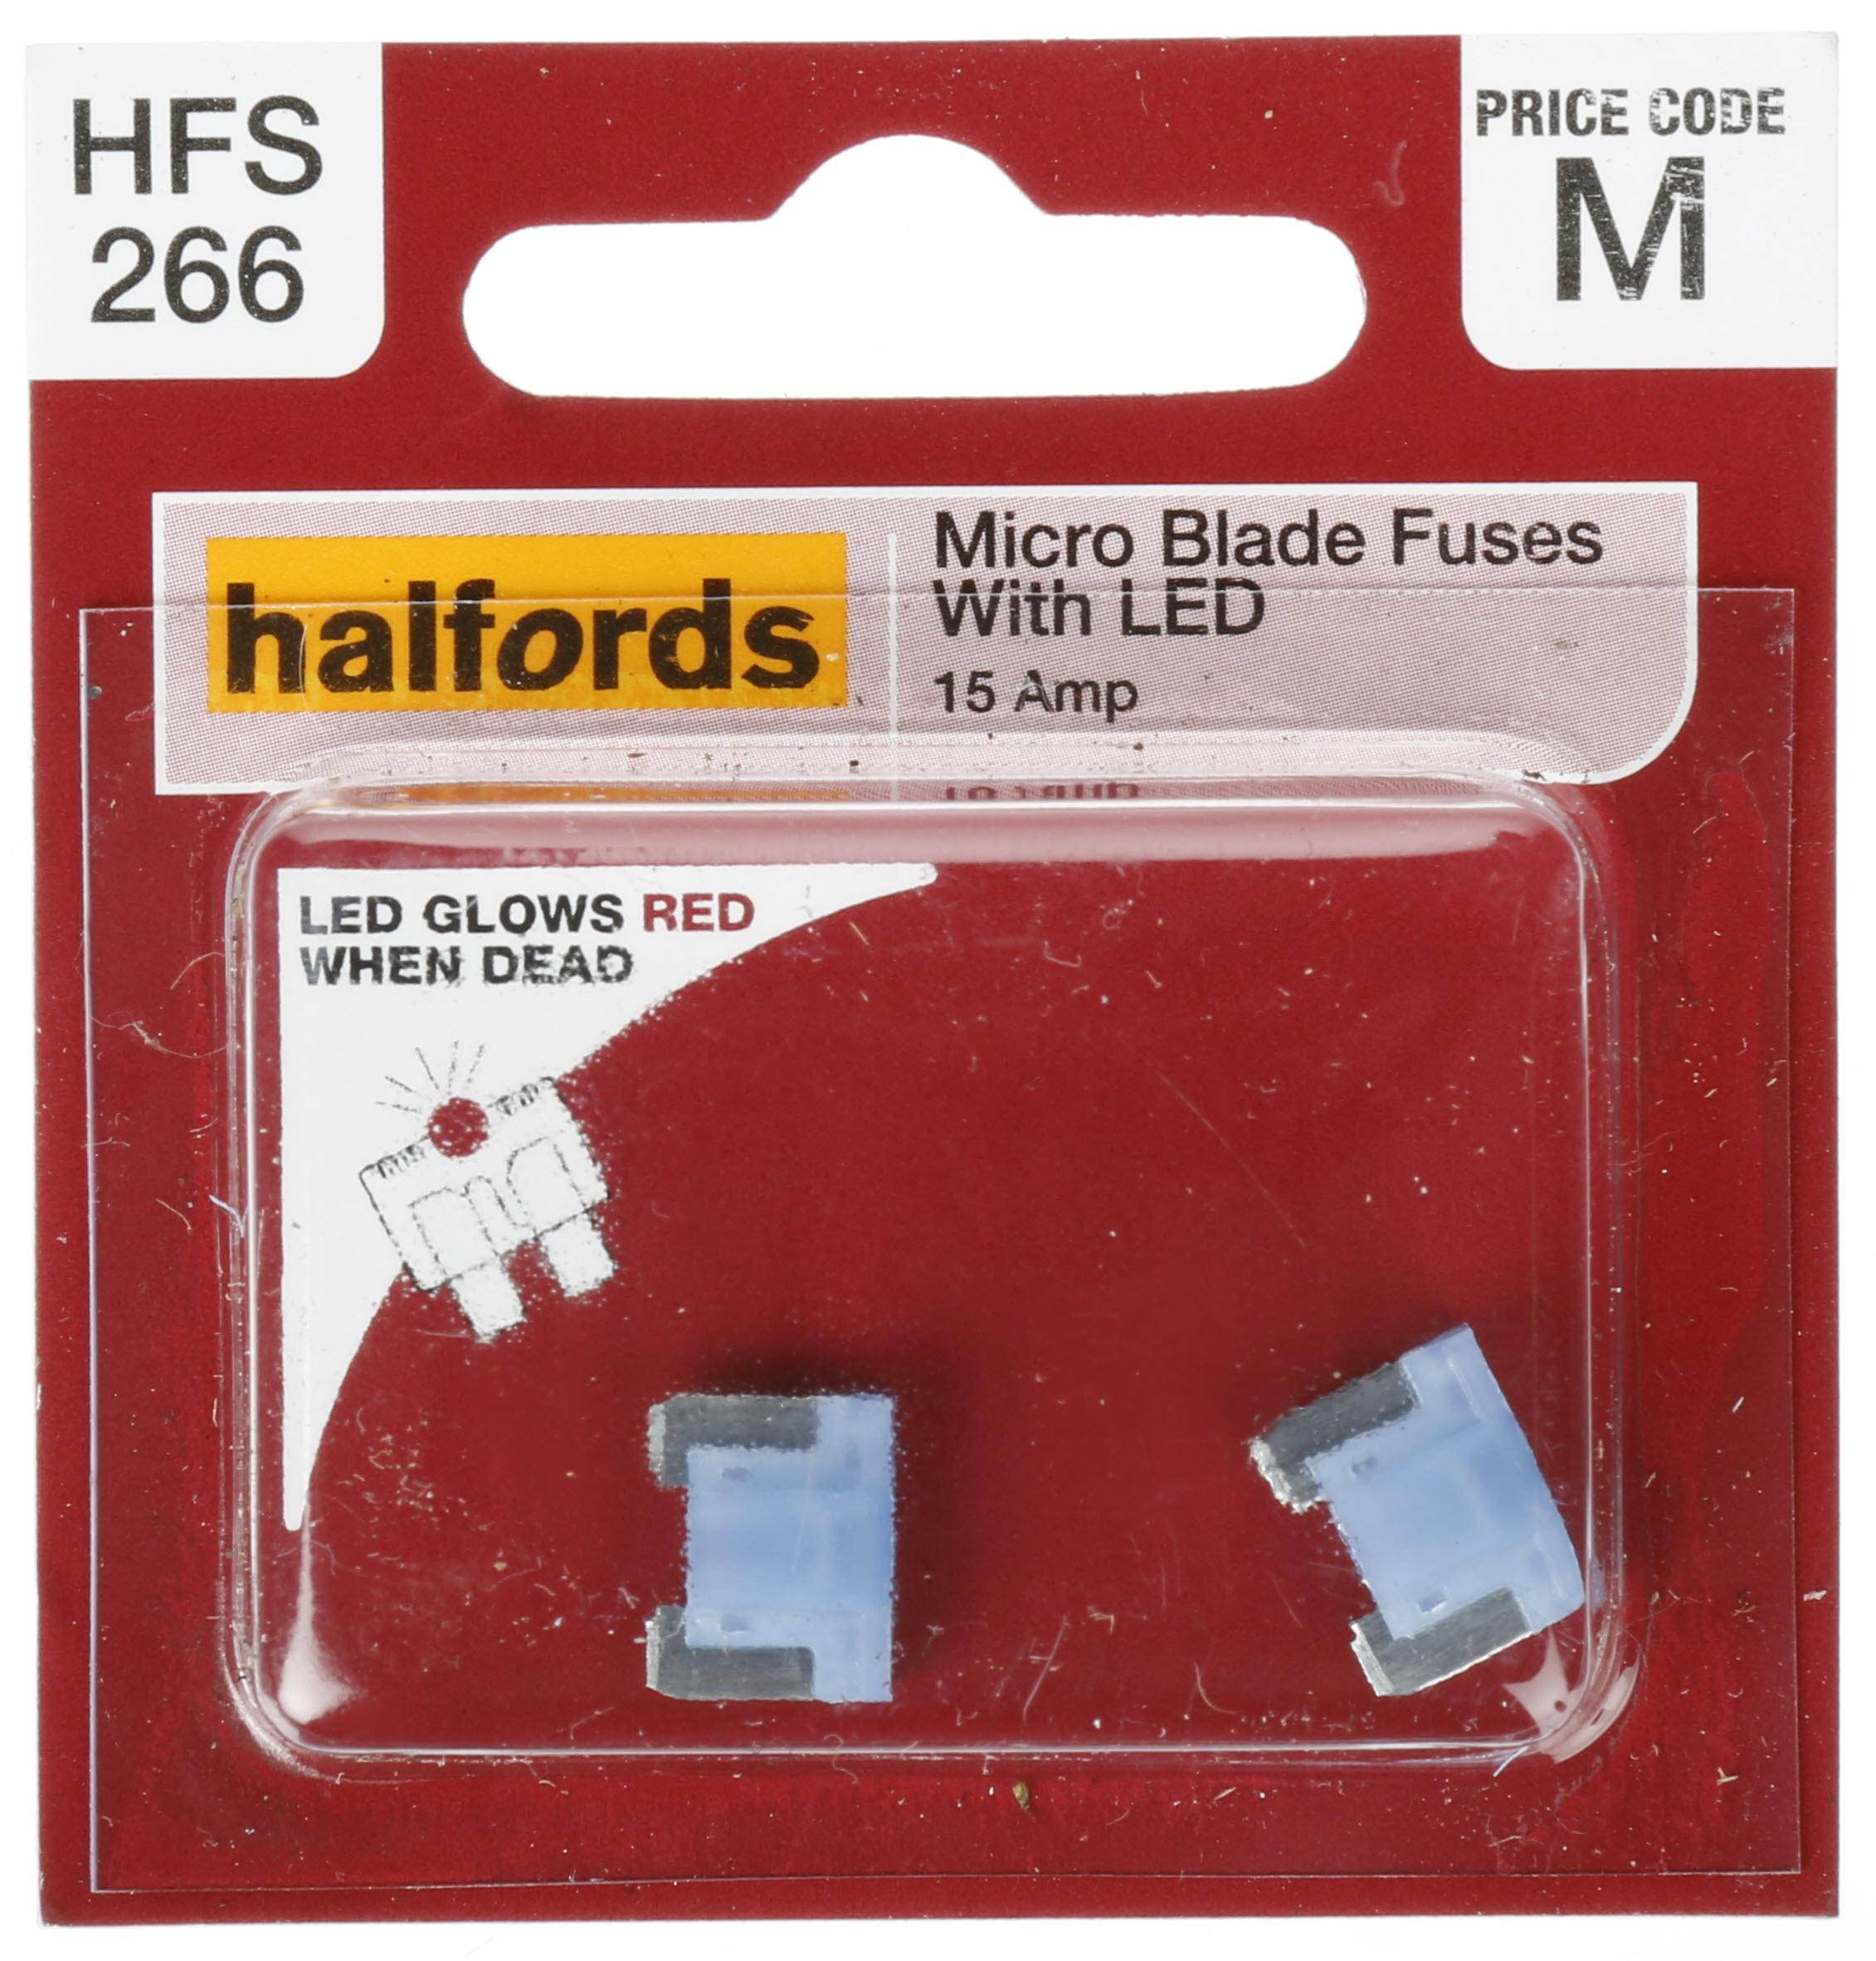 Halfords Fuse Micro Blade Led 15 Amp (Hfs266)